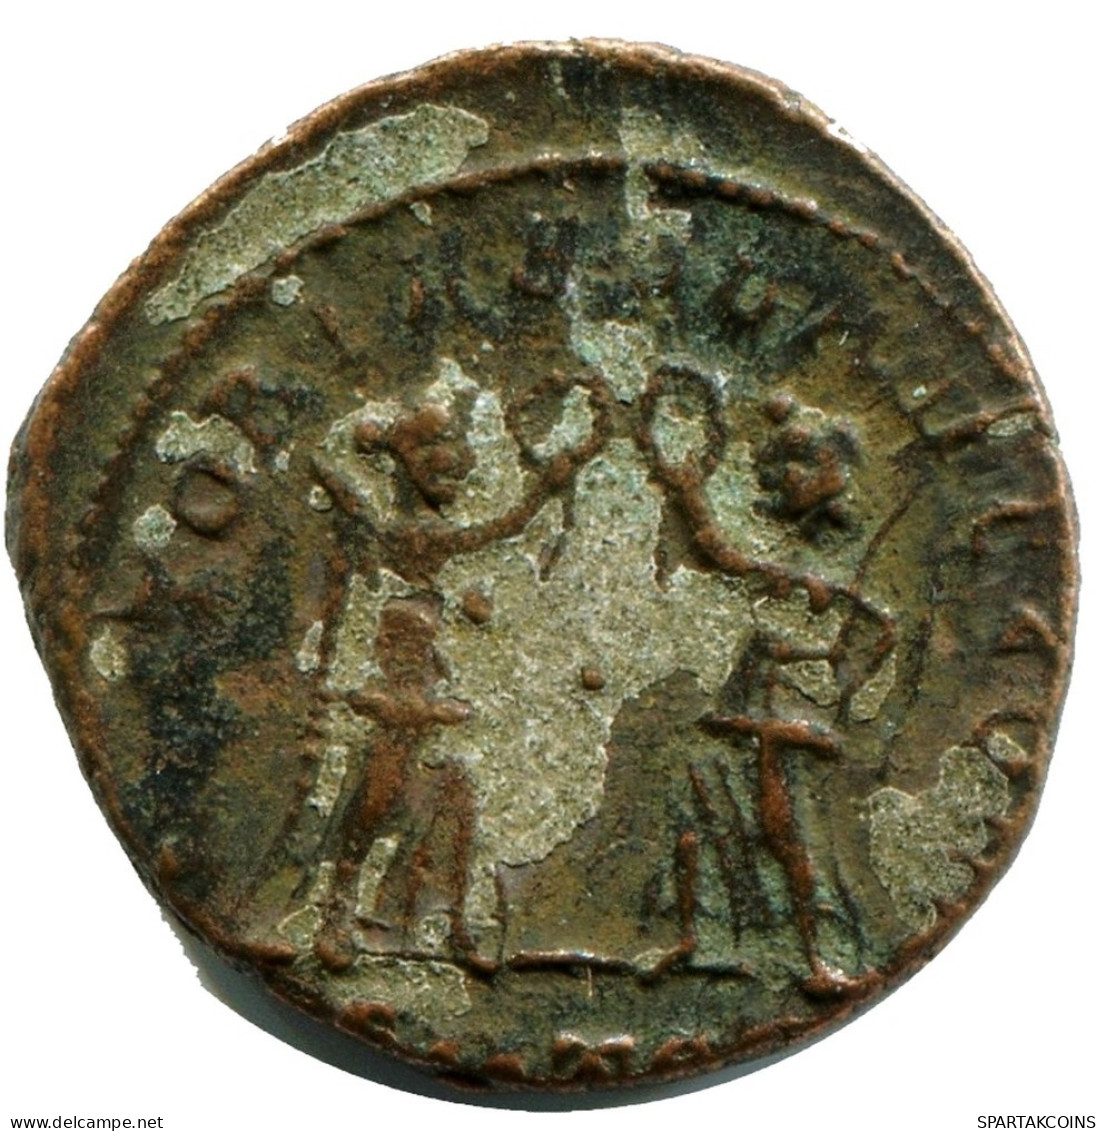 CONSTANS MINTED IN THESSALONICA FROM THE ROYAL ONTARIO MUSEUM #ANC11881.14.D.A - El Impero Christiano (307 / 363)